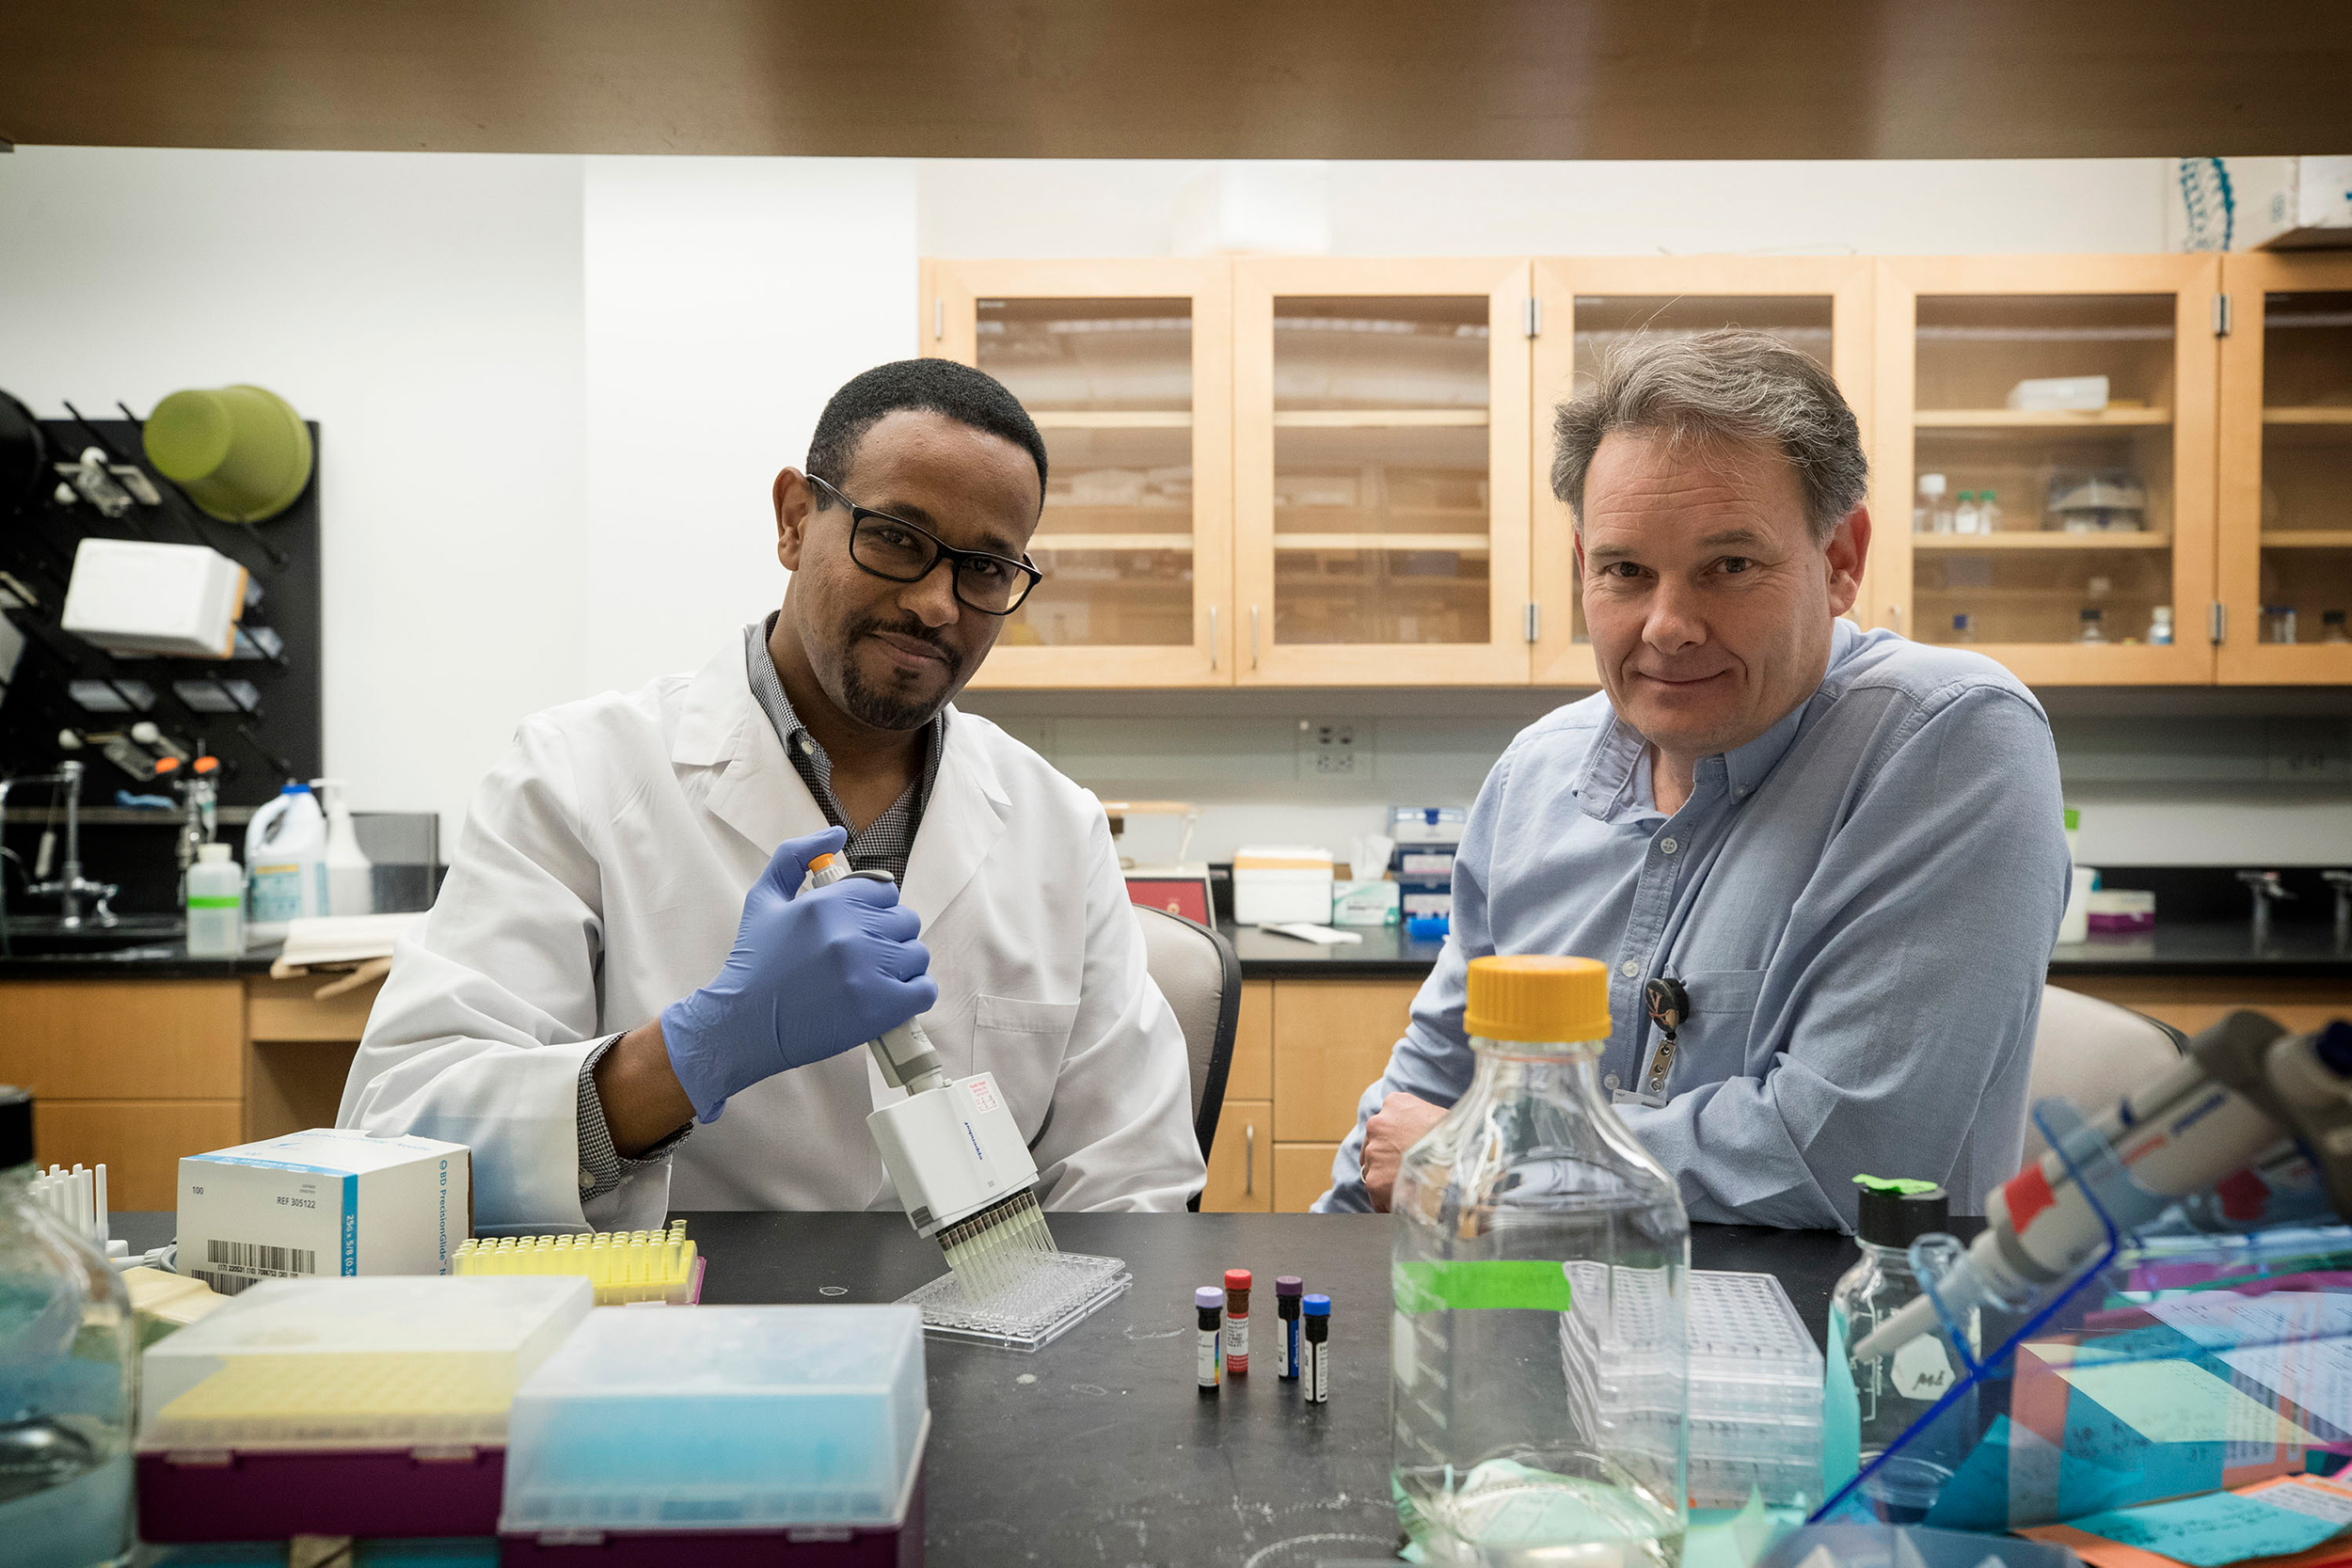 Medical researchers Lelisa Gemta, left, and Timothy Bullock working on an experiment together in the lab look at the camera